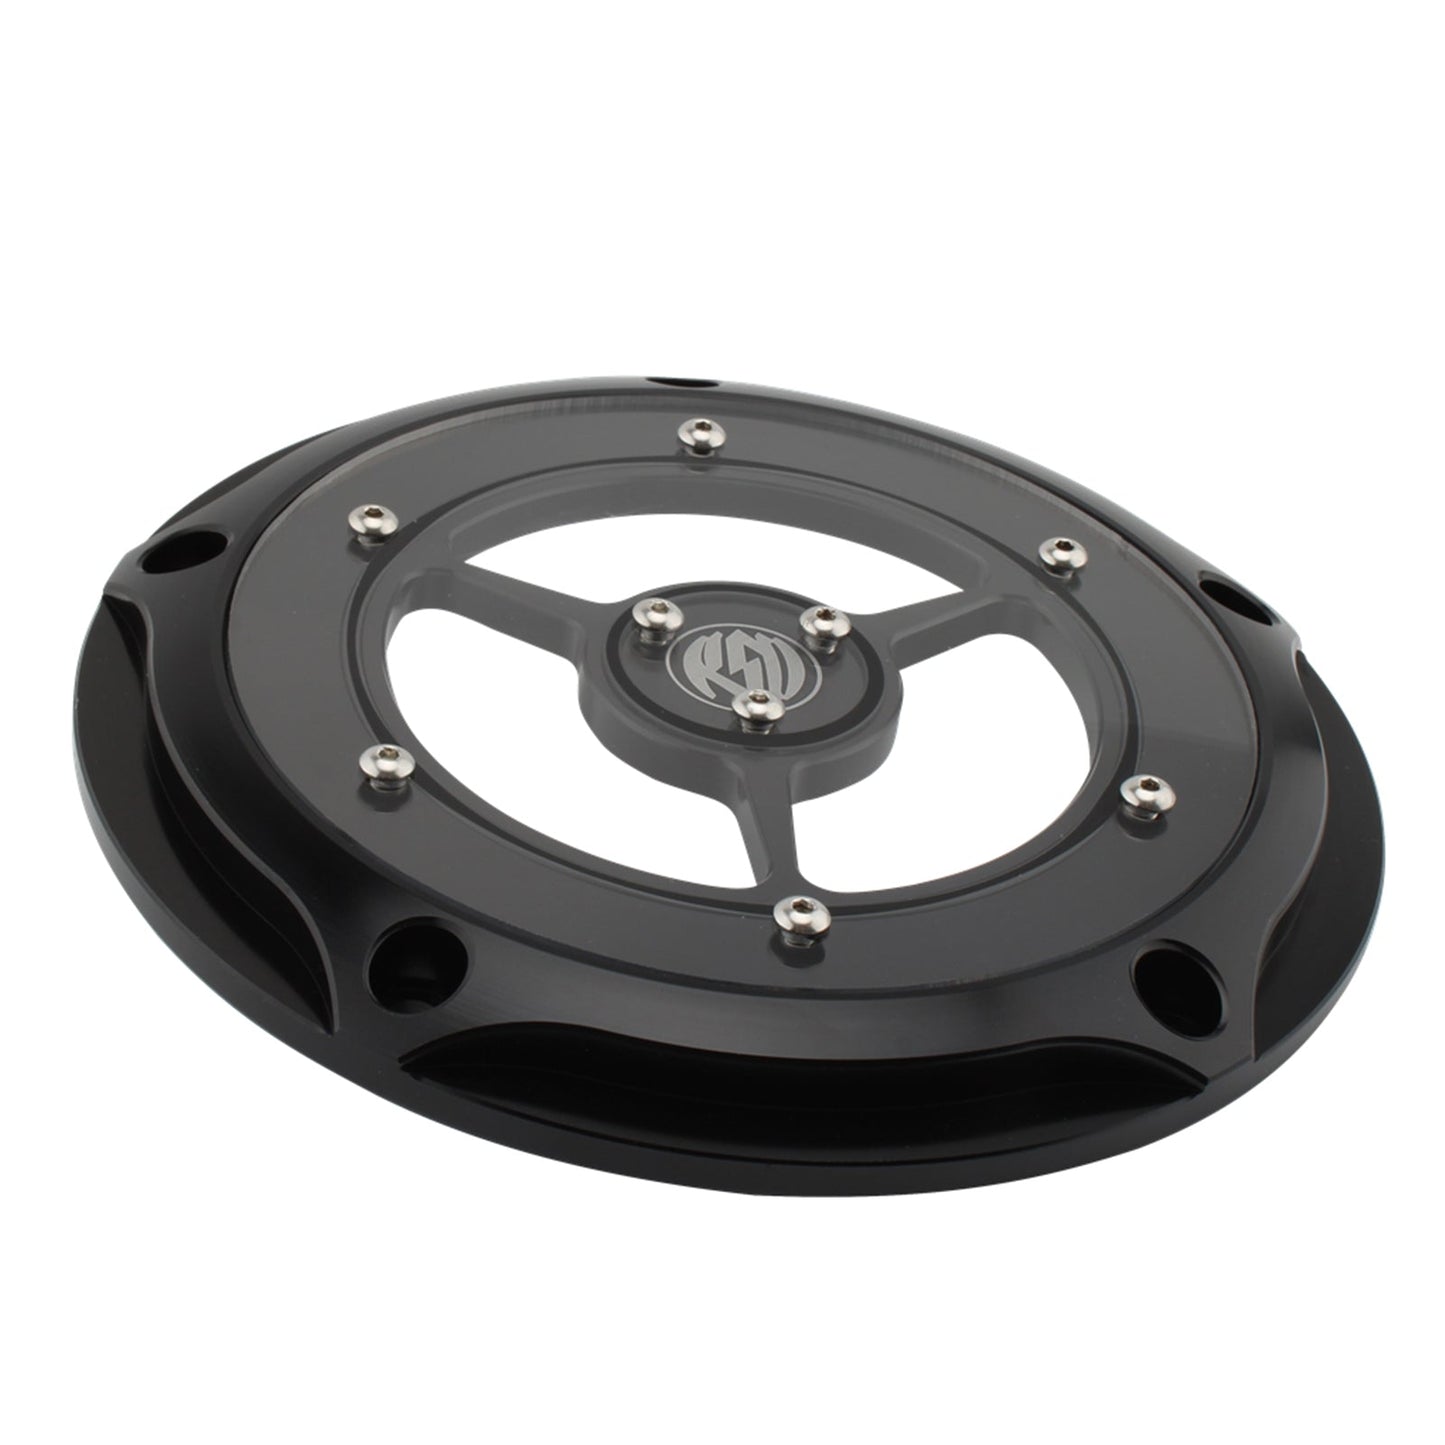 Engine Protector Crank Case Stator Cover Black Fit For Road King Fat Glide 1584